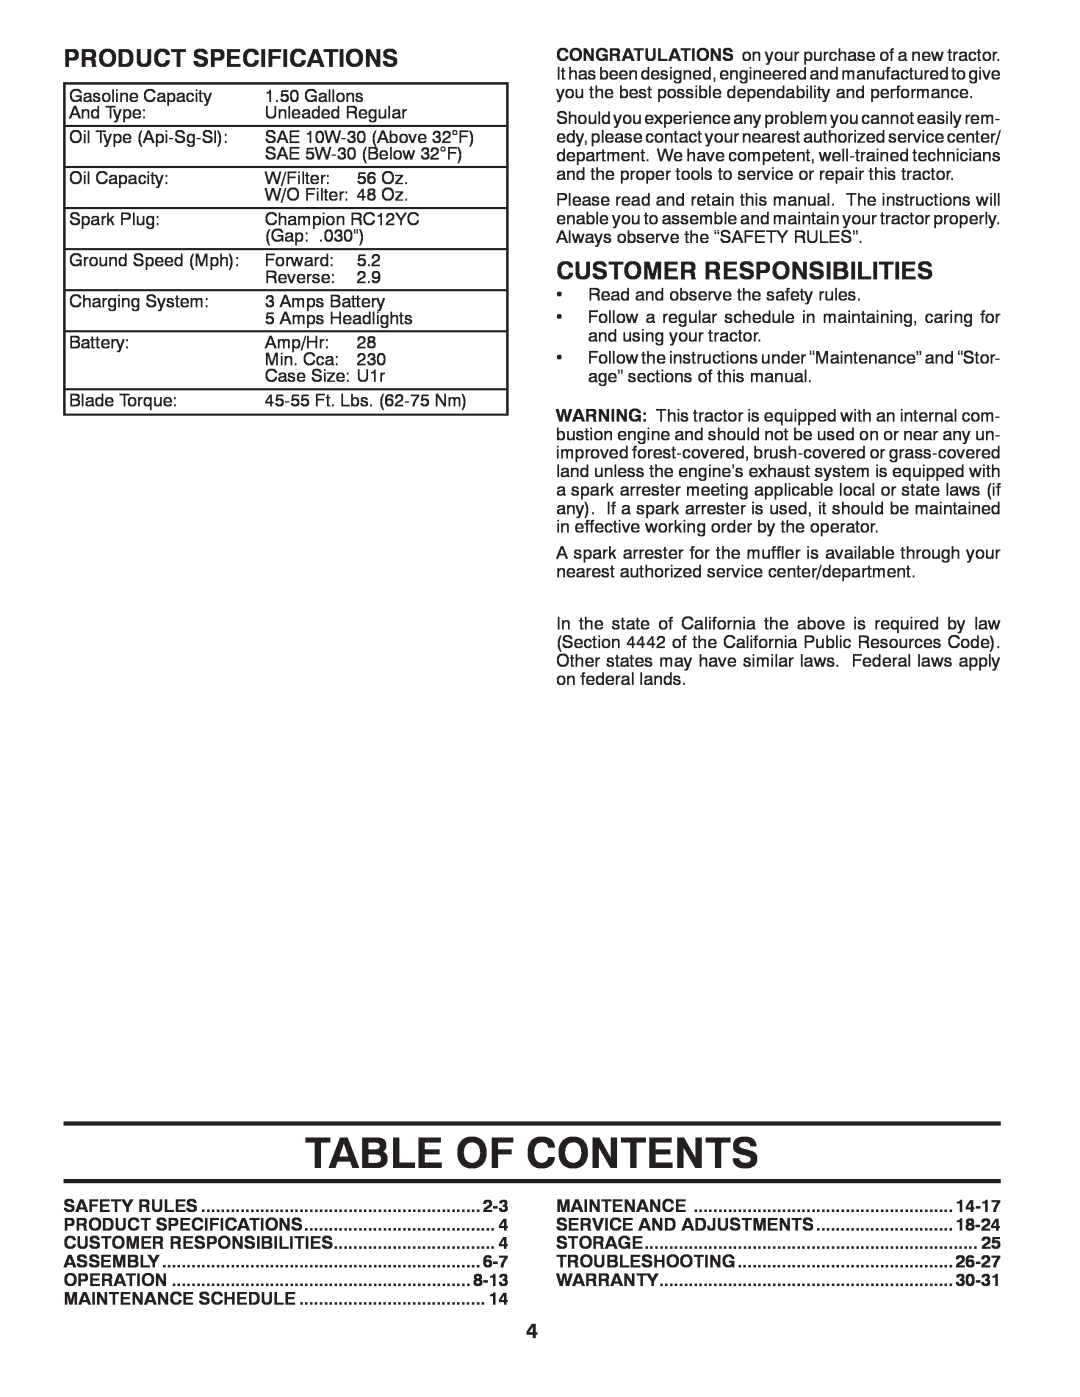 Ariens 935335 42 Table Of Contents, Product Specifications, Customer Responsibilities, 8-13, 14-17, 18-24, 26-27, 30-31 